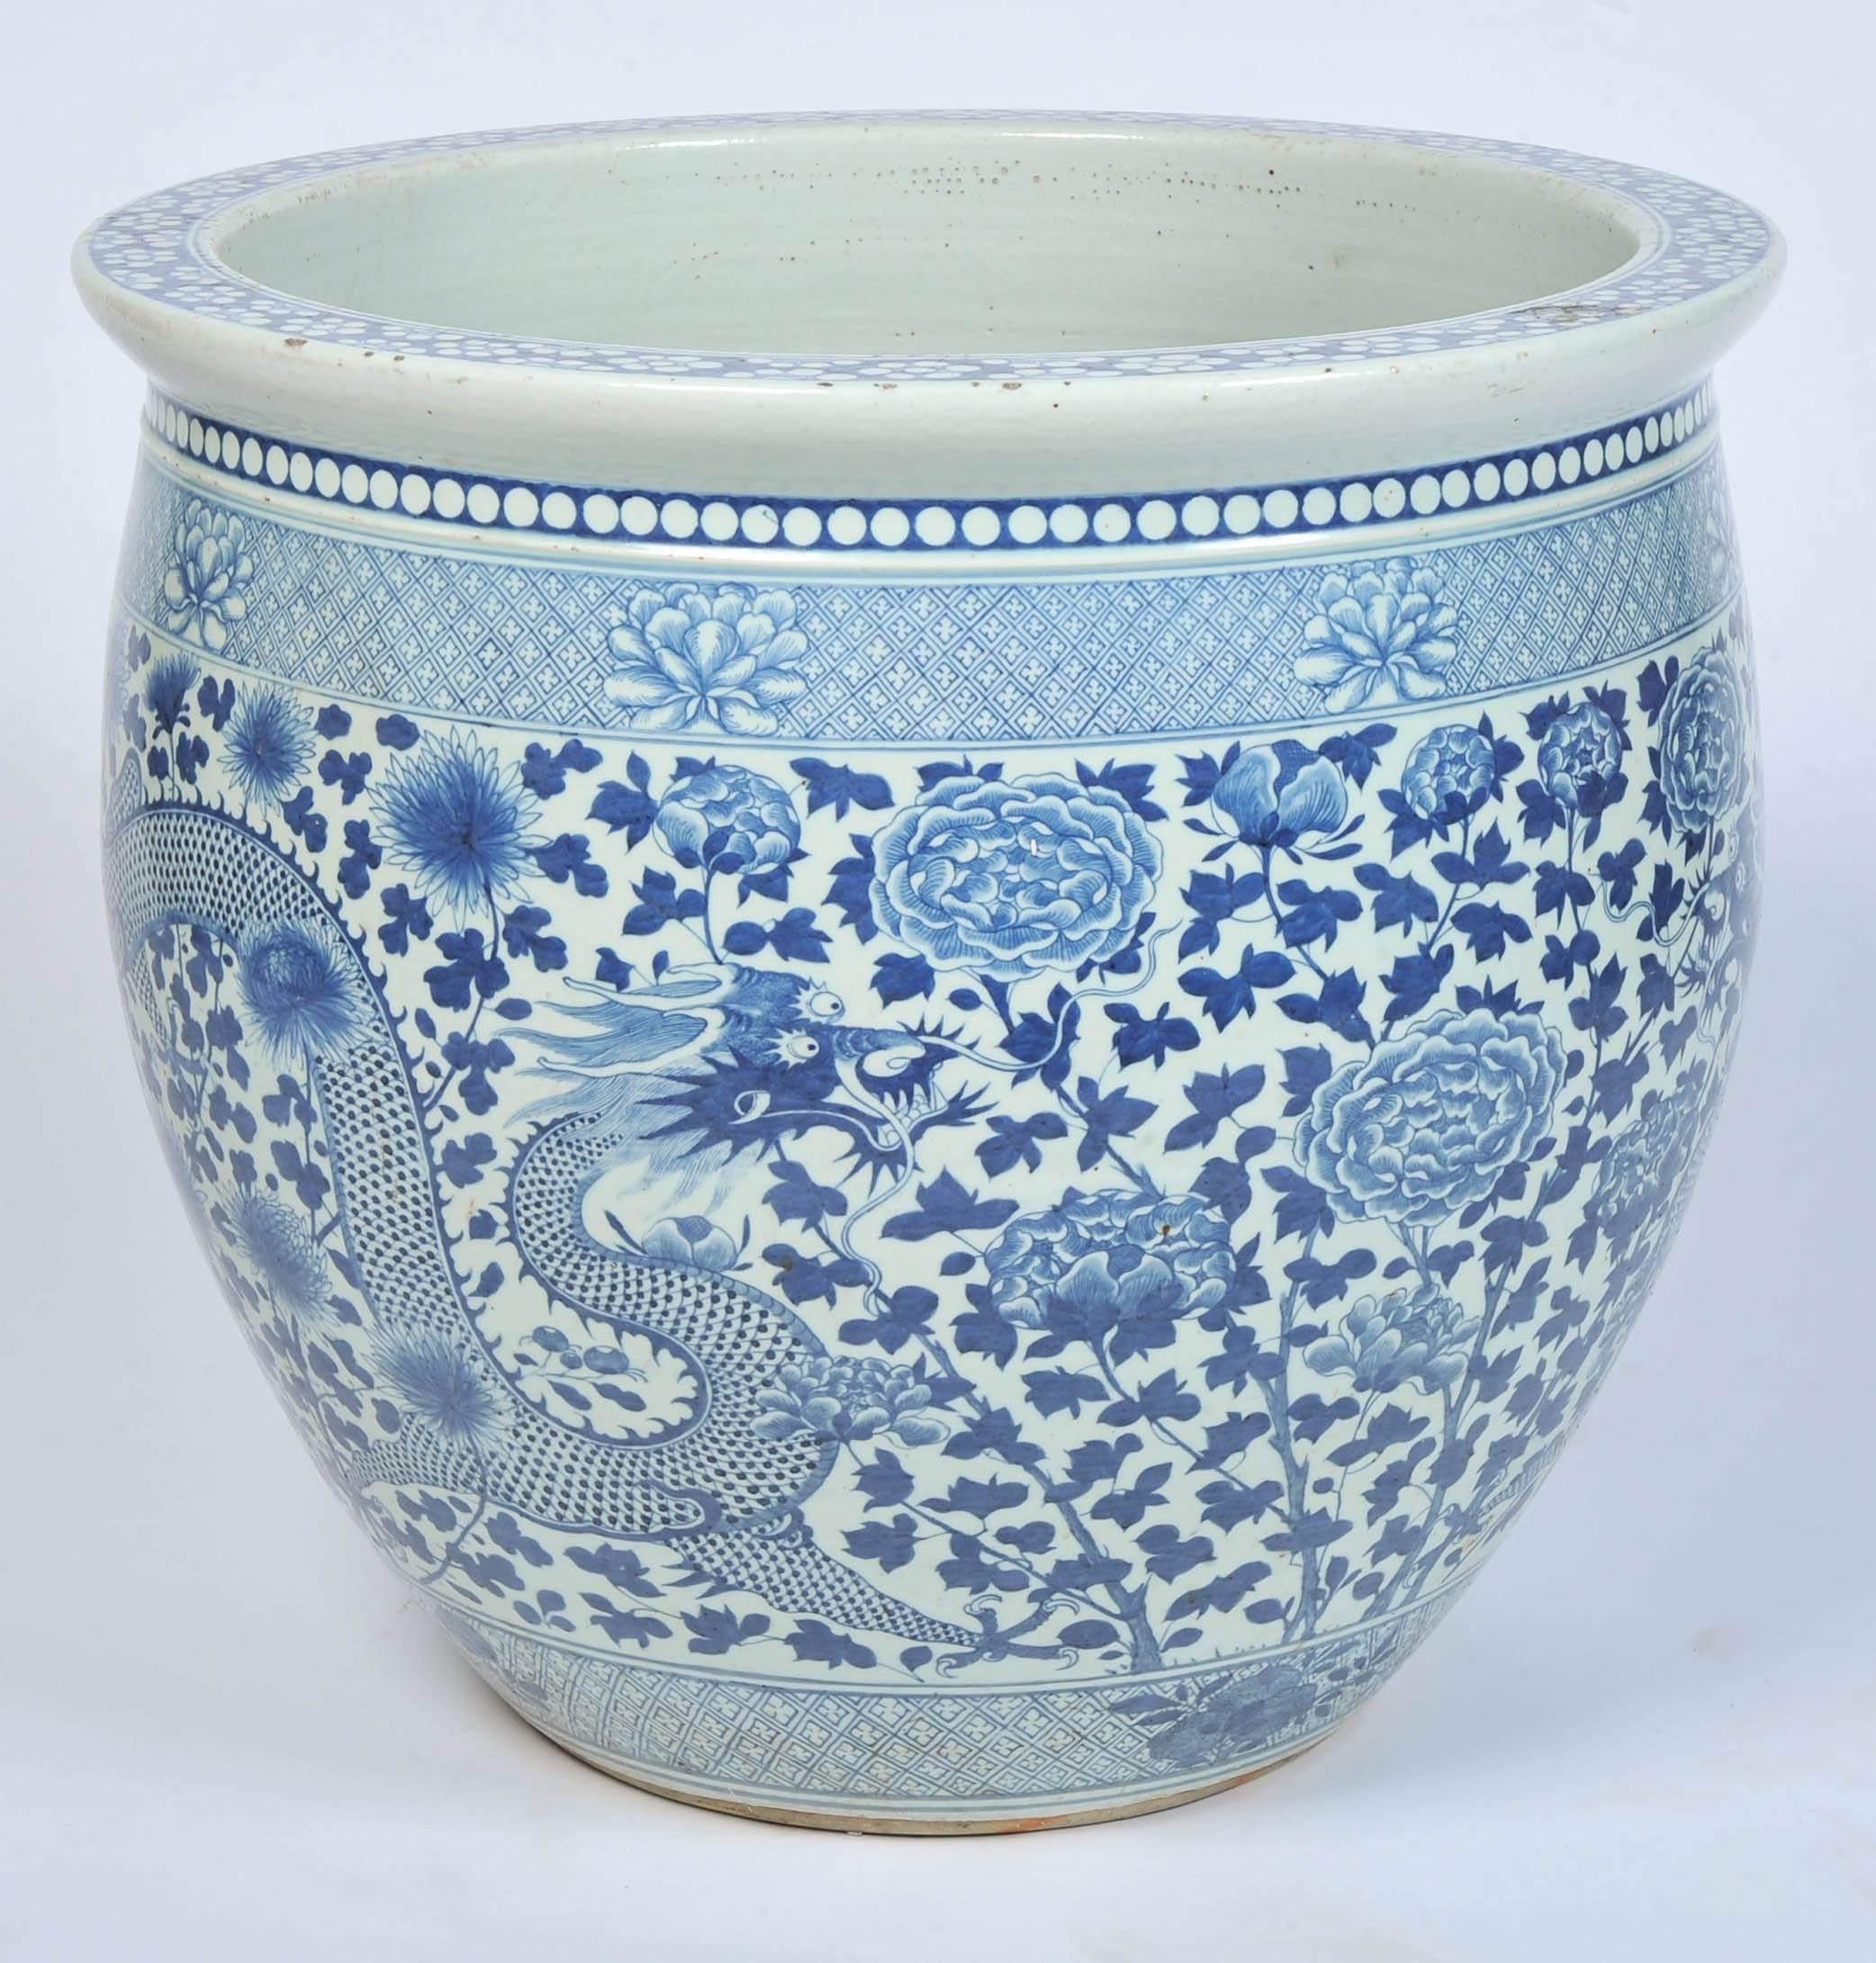 A large and impressive pair of 19th century Chinese blue and white jardinieres each depicting mythical dragons and motifs.